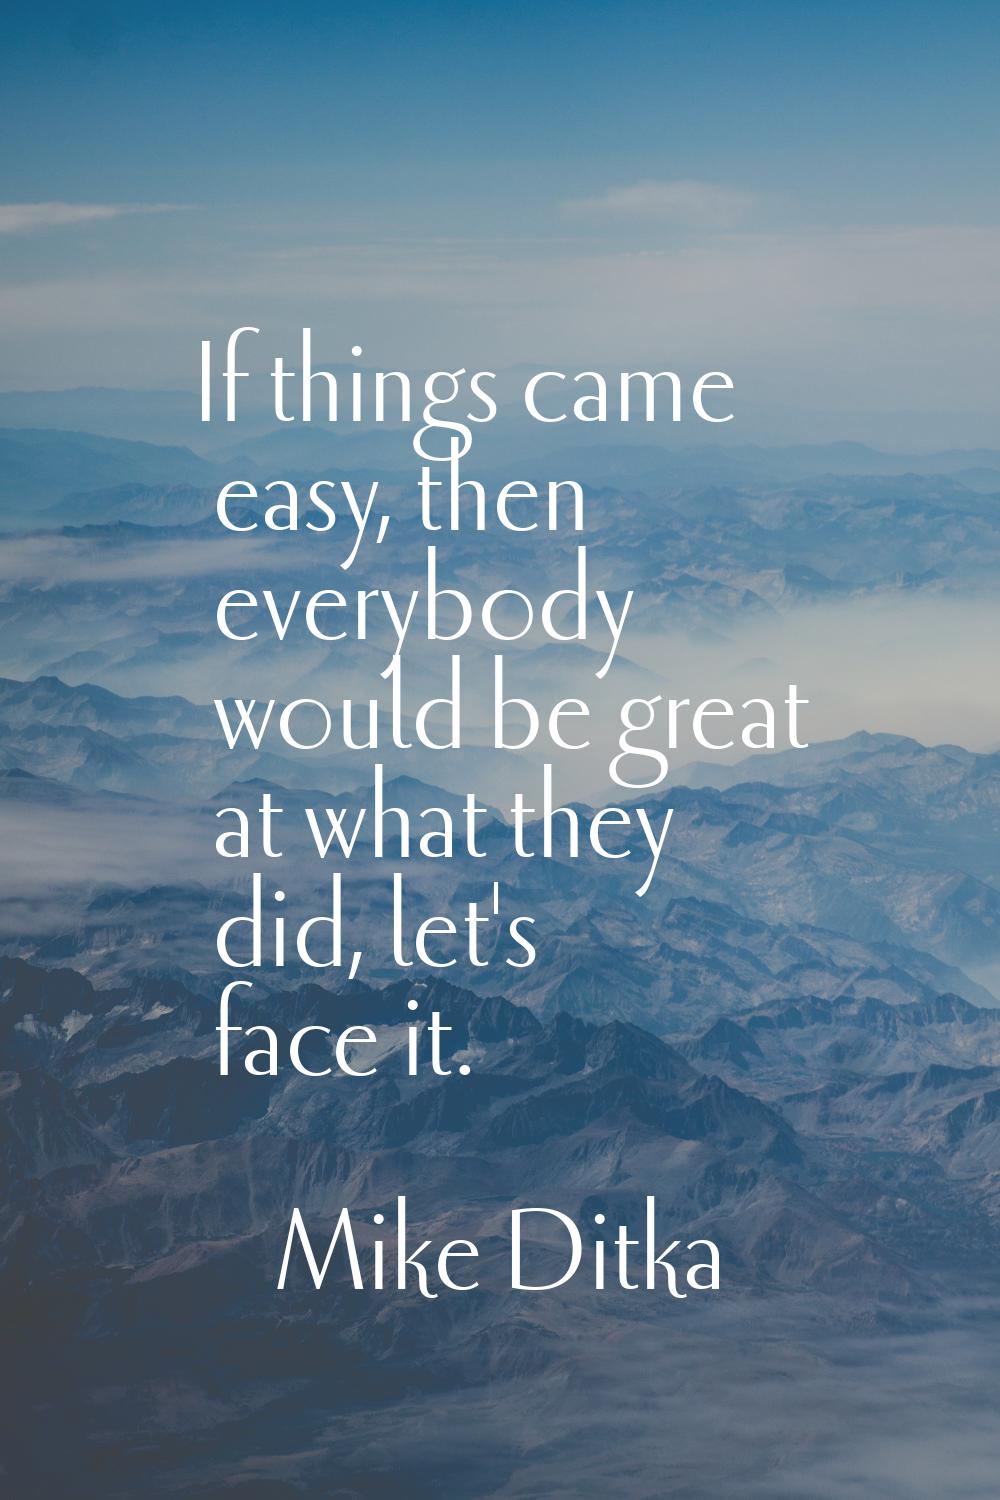 If things came easy, then everybody would be great at what they did, let's face it.